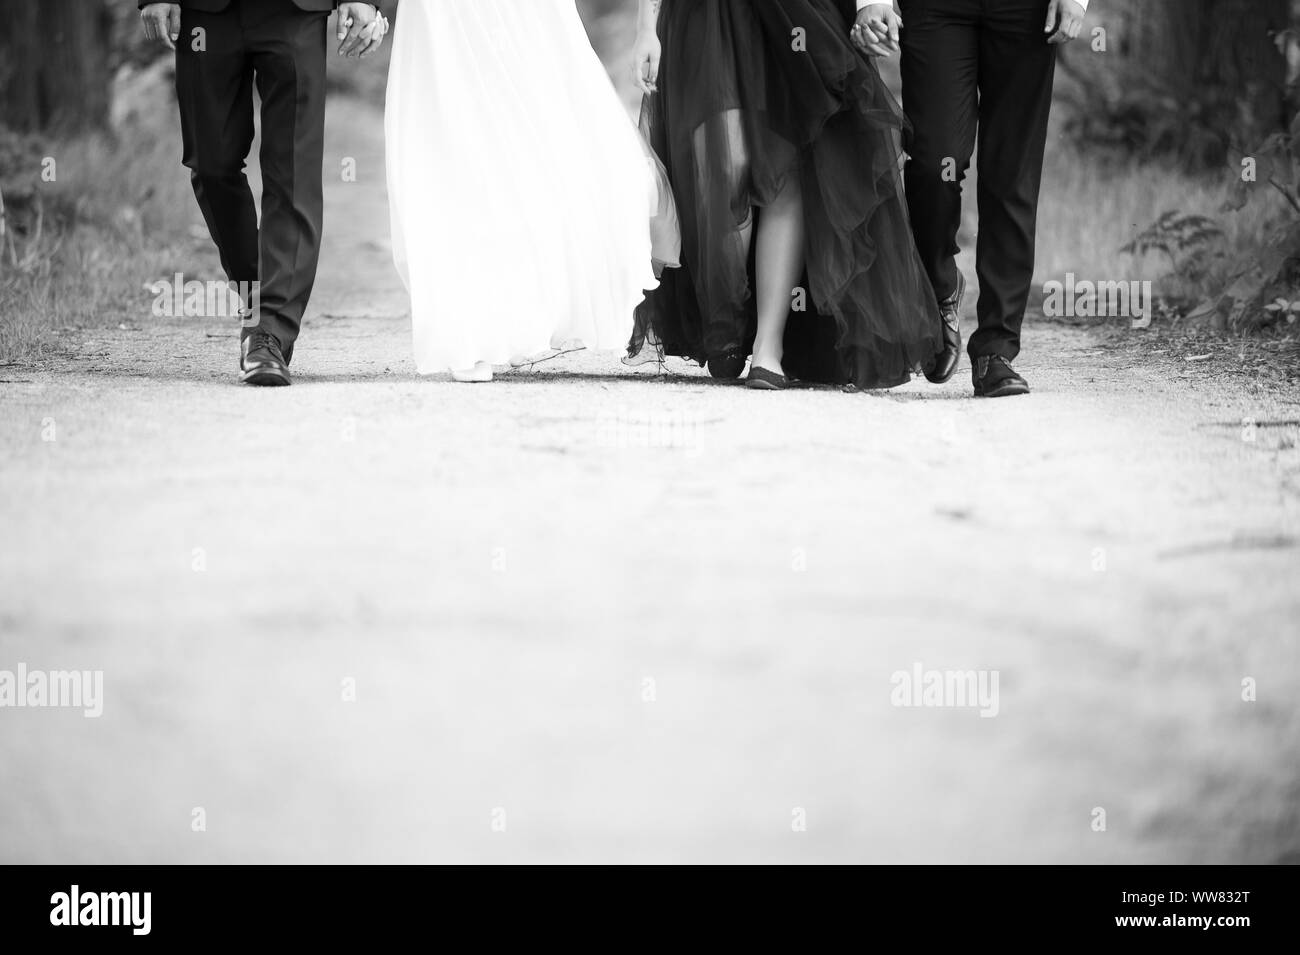 Legs of groom, bride and bridemaid and bestman. Black and white photo. Stock Photo